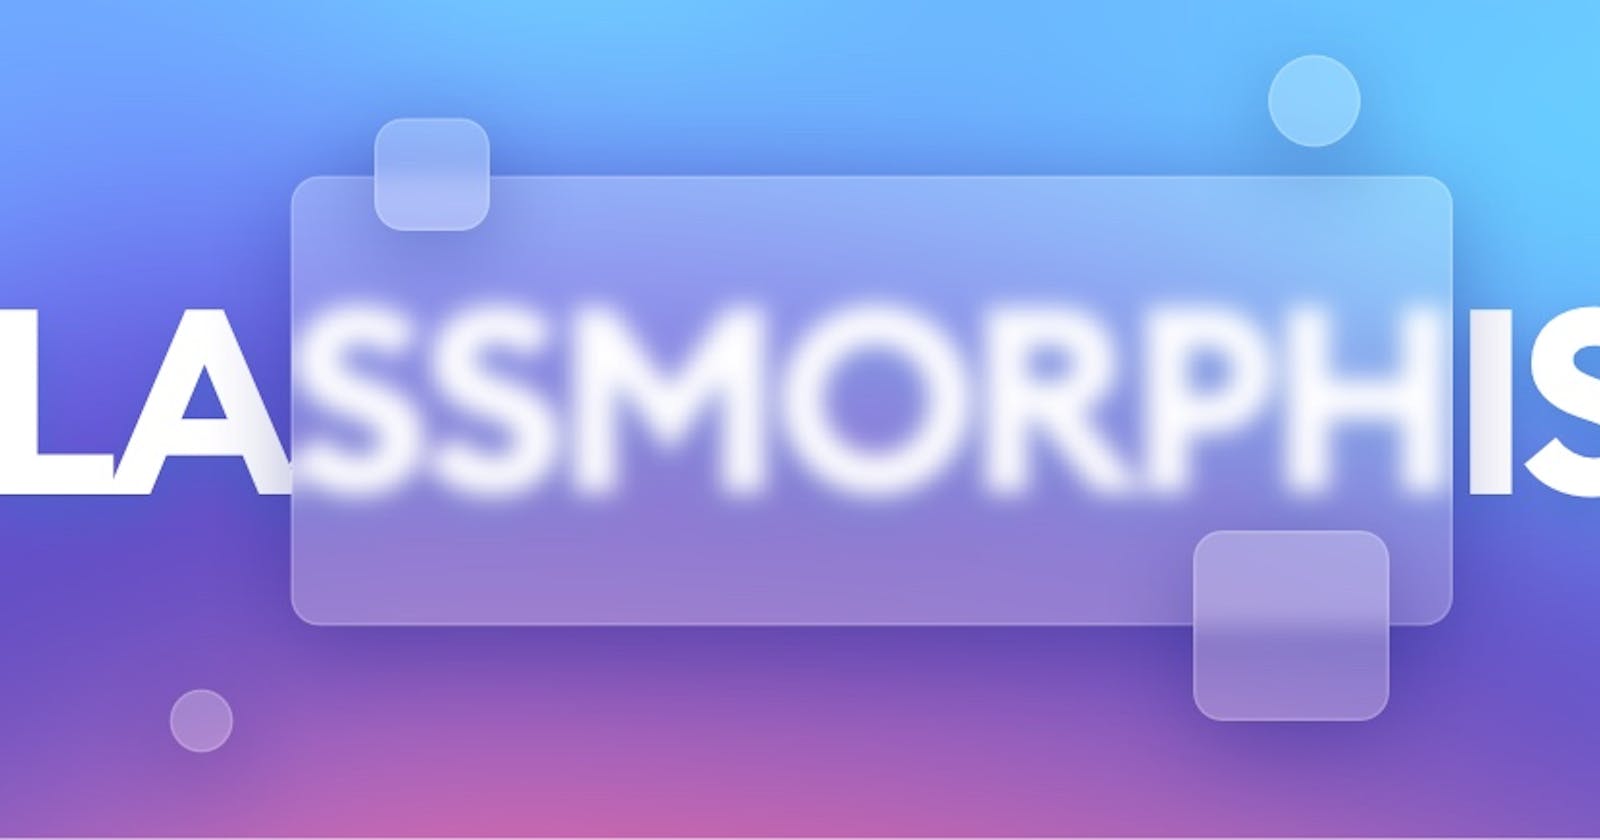 Creating the glassmorphic effect with HTML and CSS